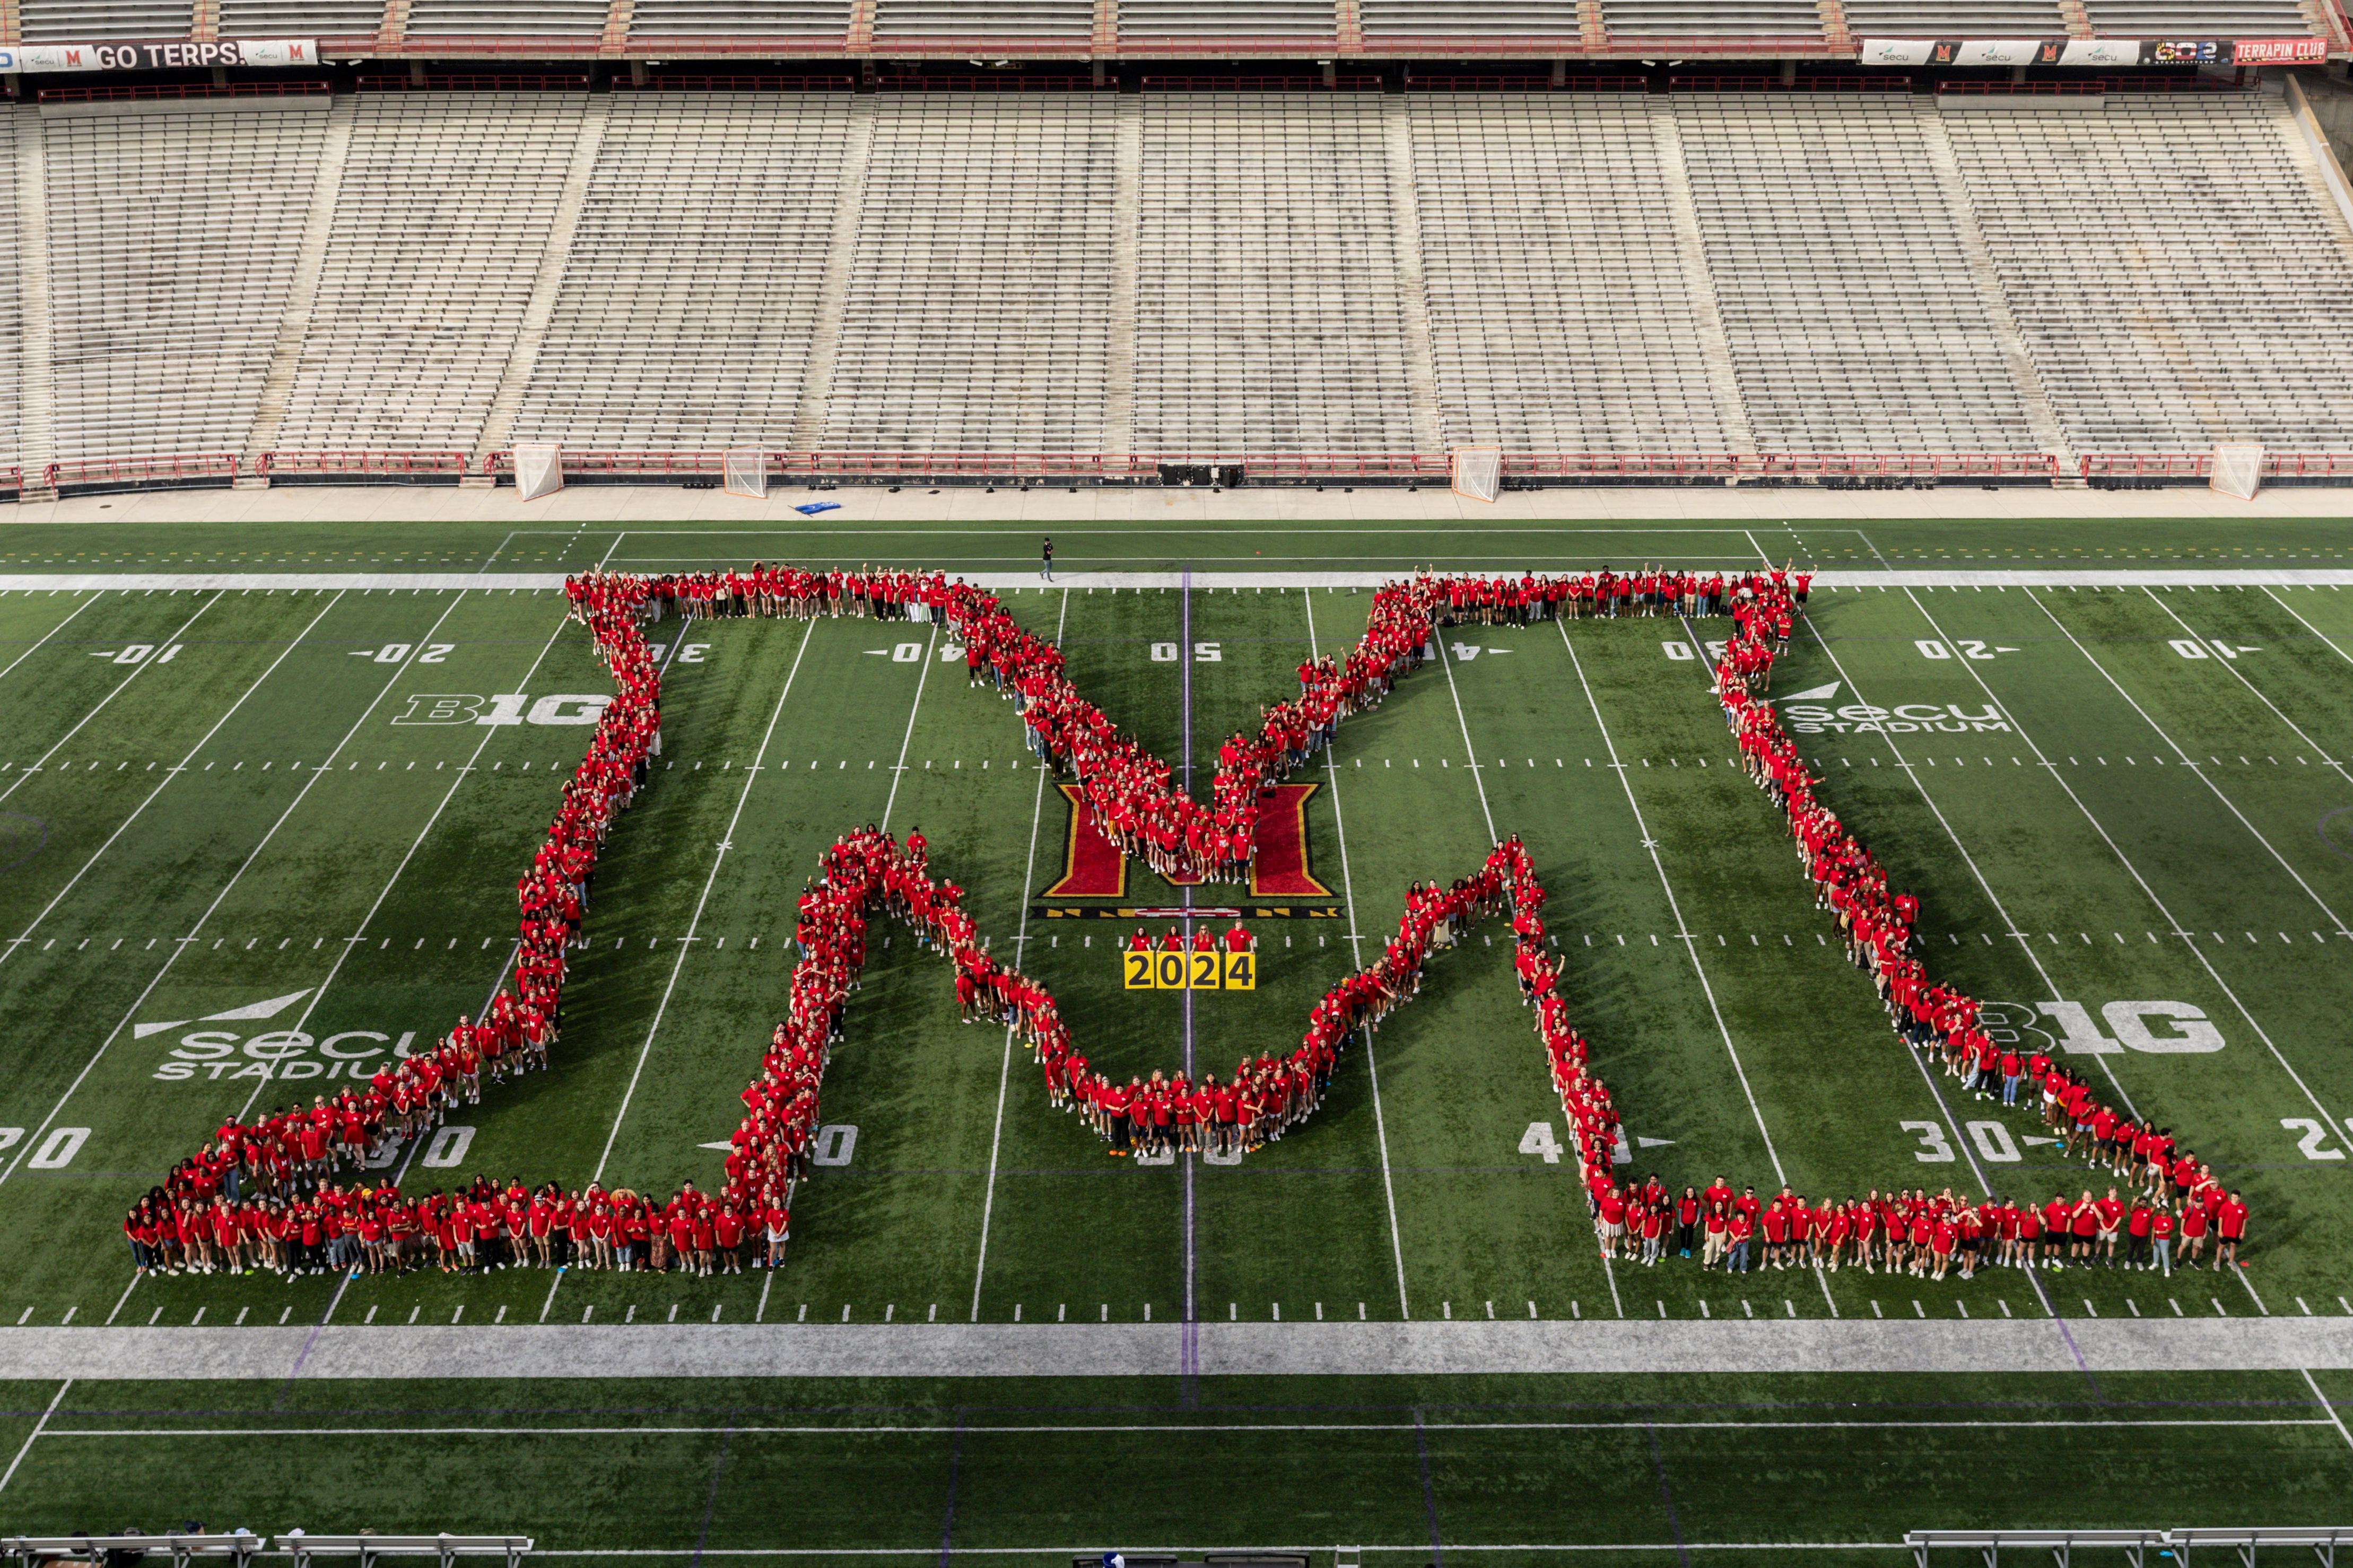 Students spelling out the Maryland M at SECU Stadium 2024